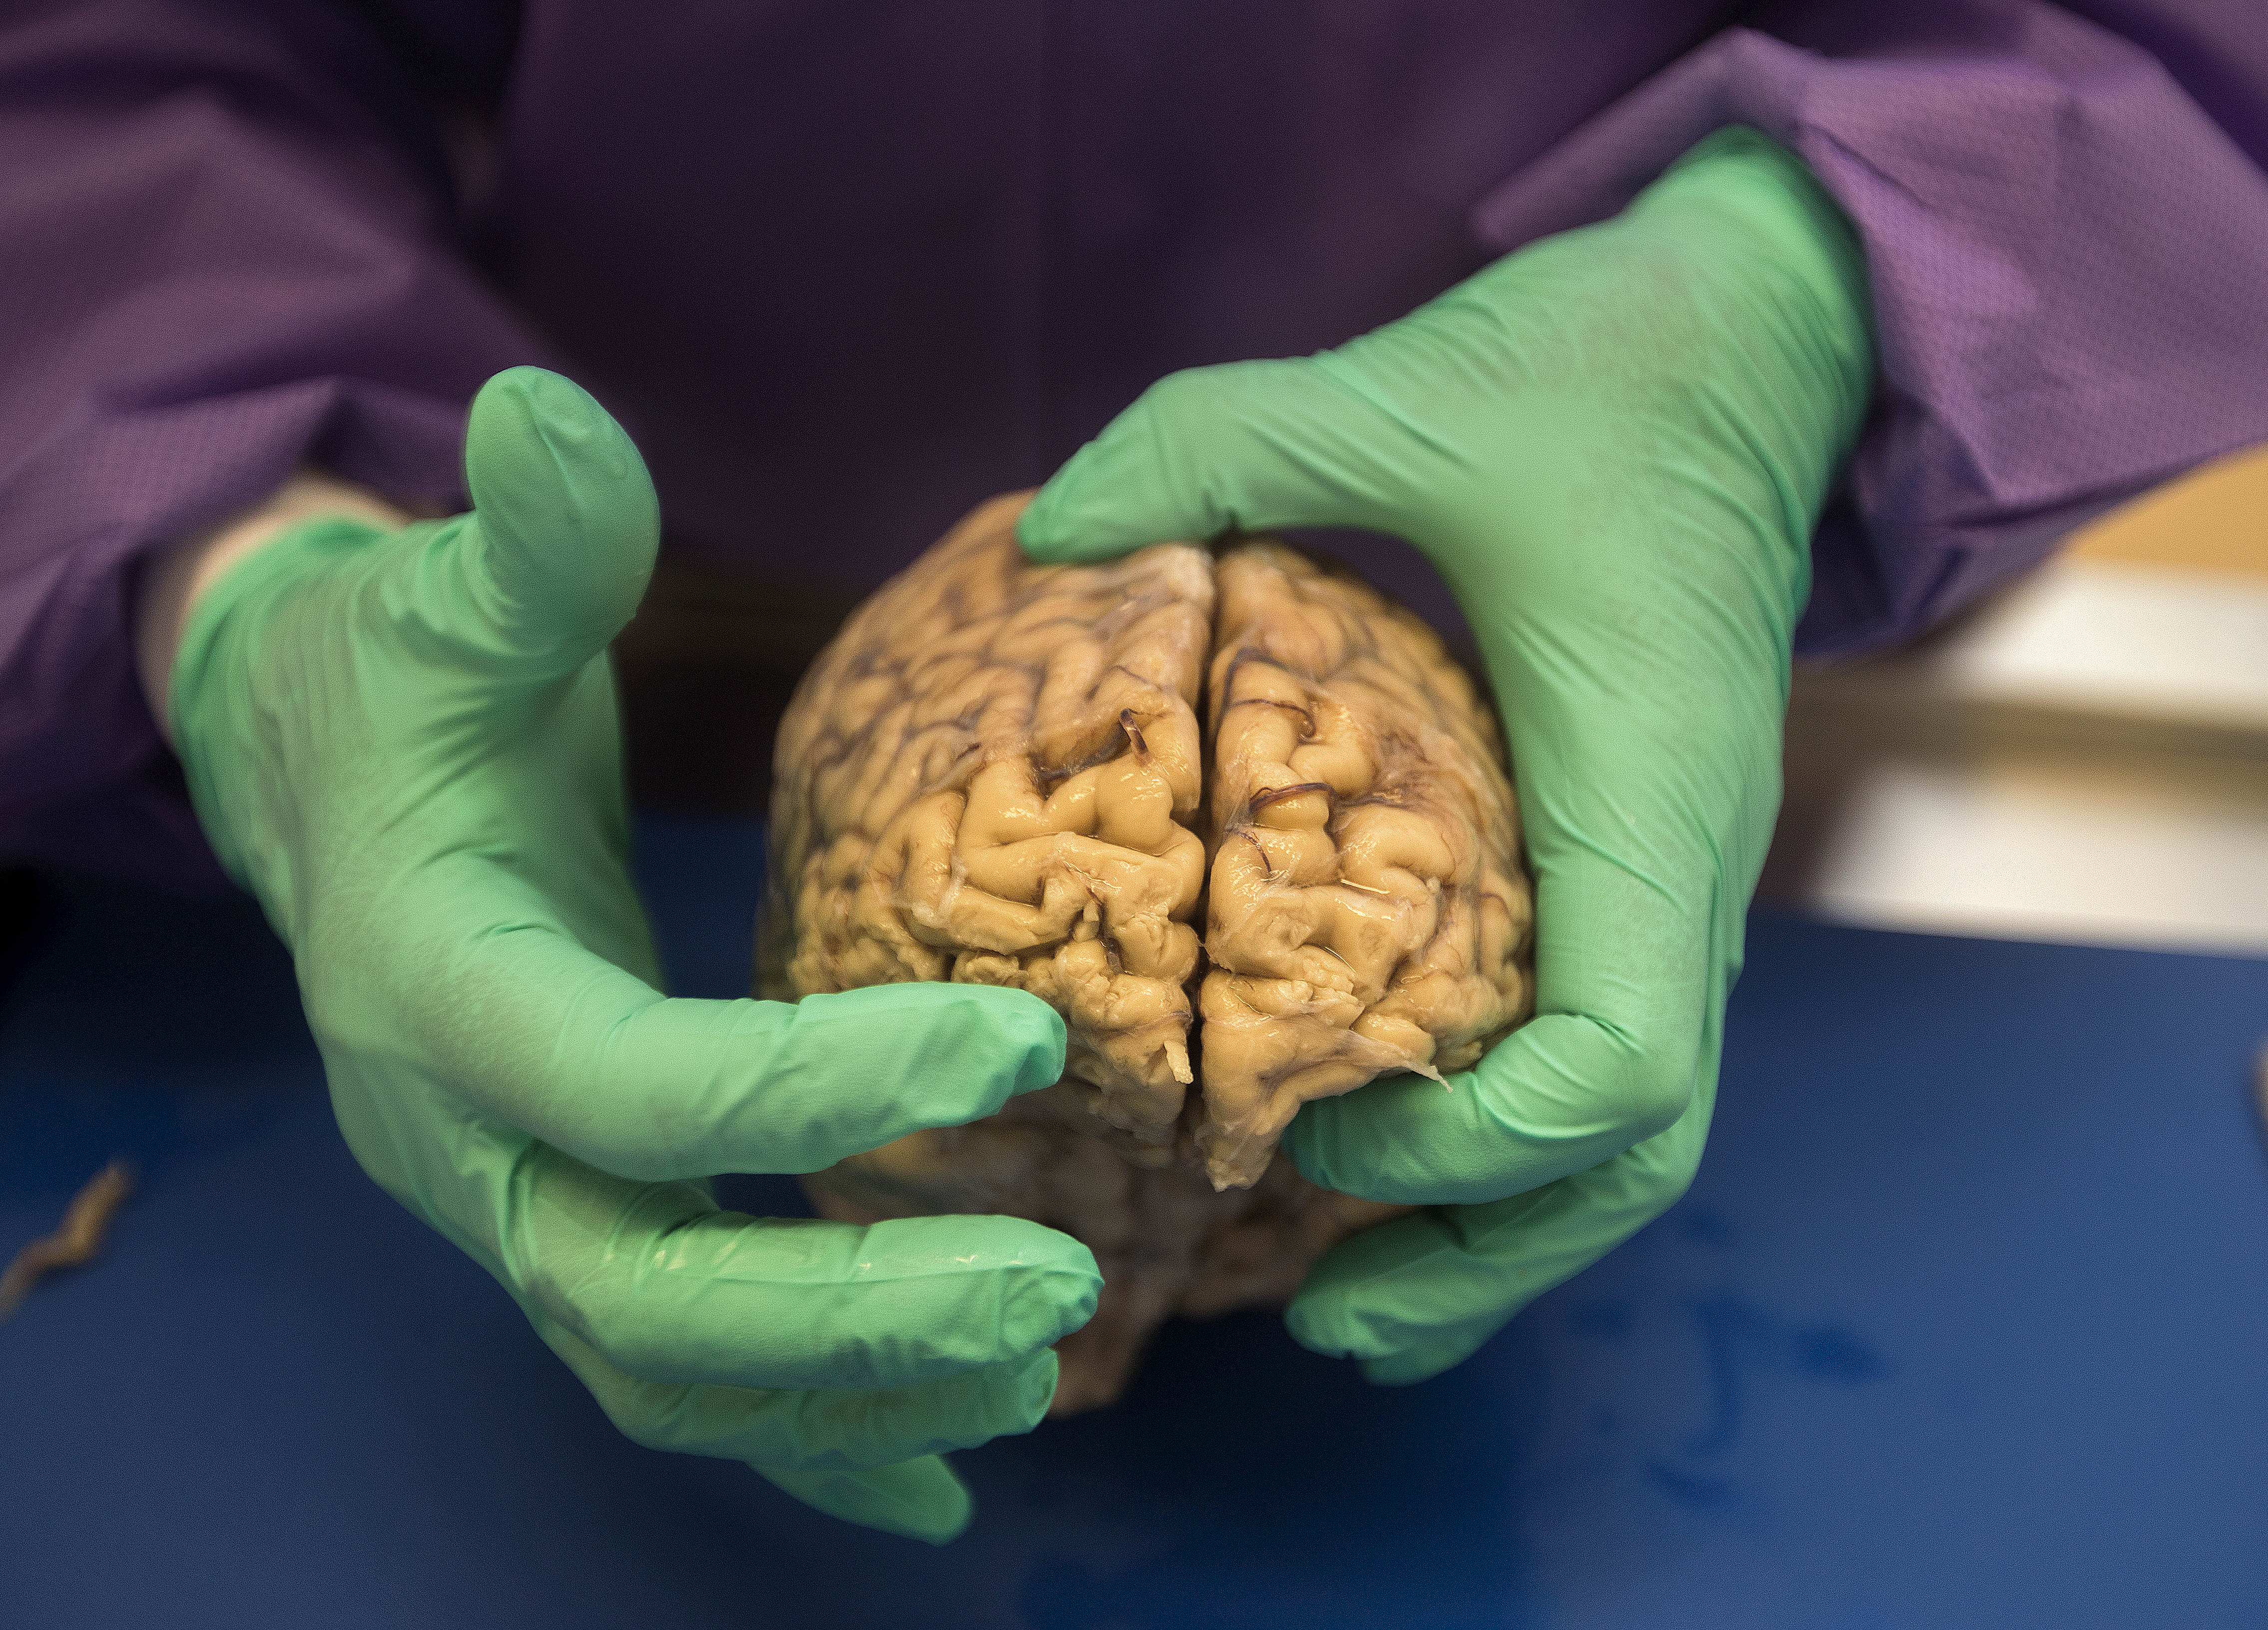 JUL. 12 2012: Dr. Ann C. McKee, Director of Boston University's CTE Center, does an autopsy on the brain of an NFL player who died in his 40s (Boston Globe&mdash;Boston Globe via Getty Images)